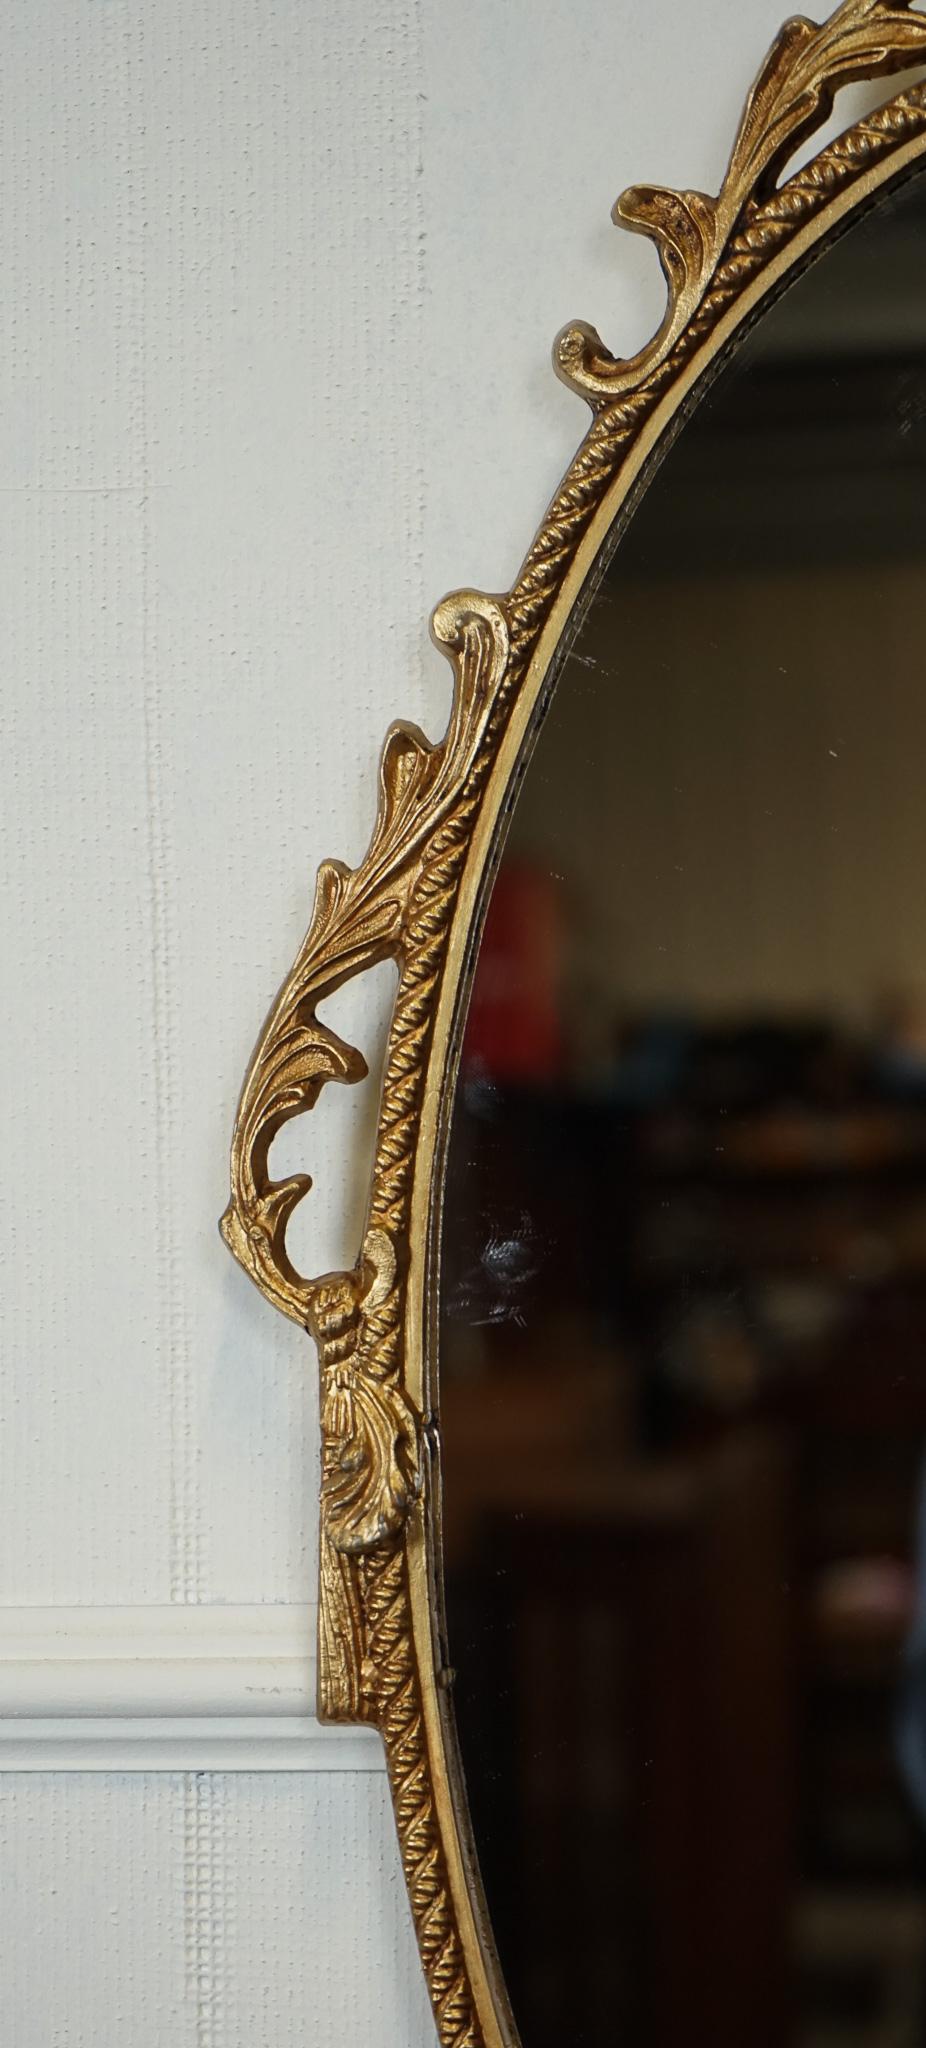 LOVELY OVAL GOLD ORNATE MiRROR J1 In Good Condition For Sale In Pulborough, GB